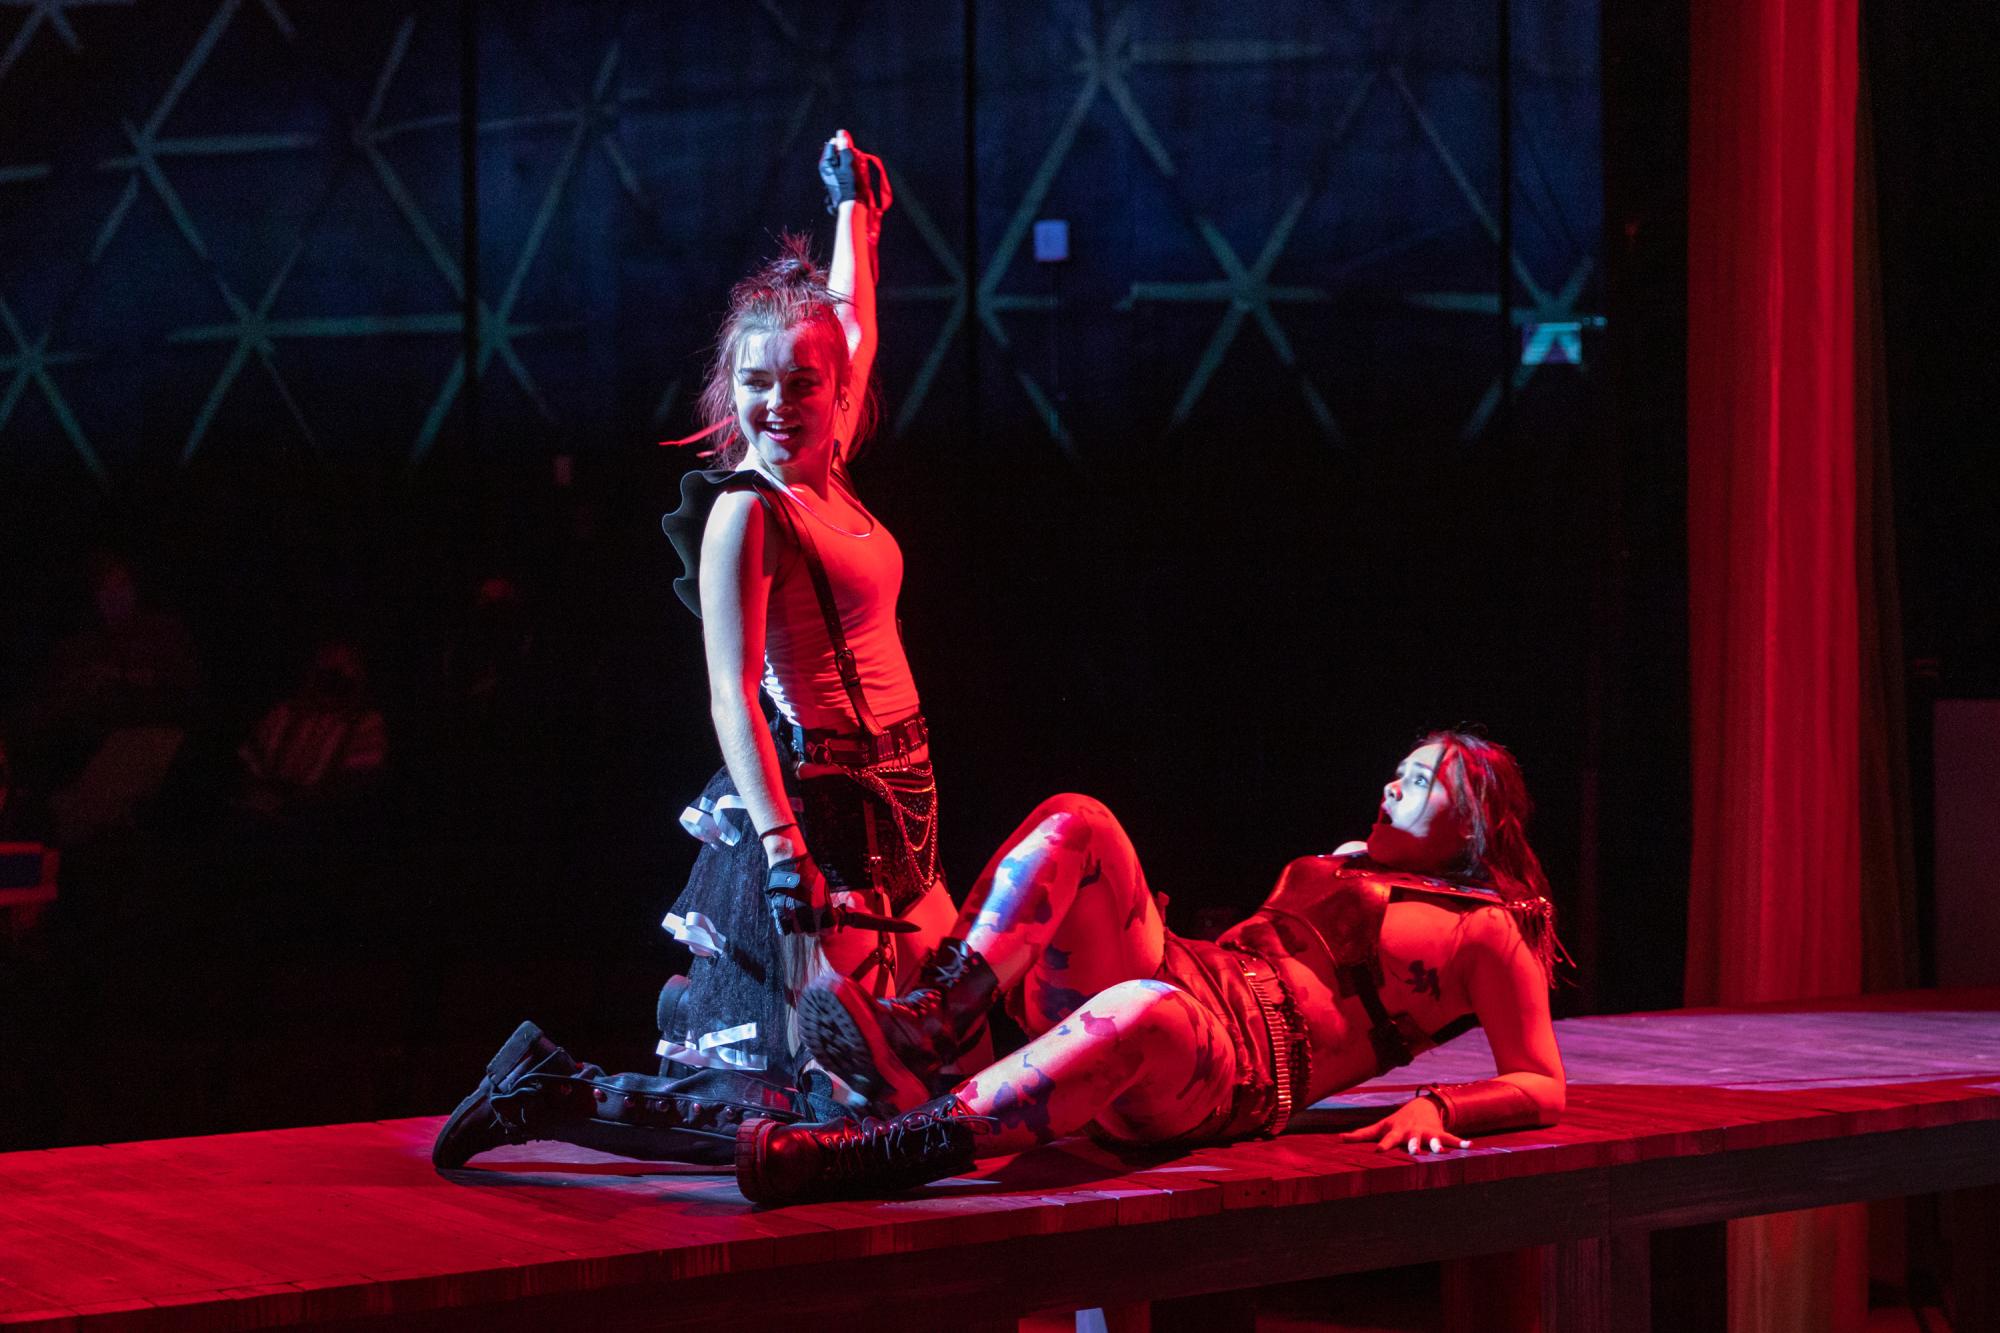 an actor holds up their hand triumphantly, while the actor below them looks horrified, with red stage lighting